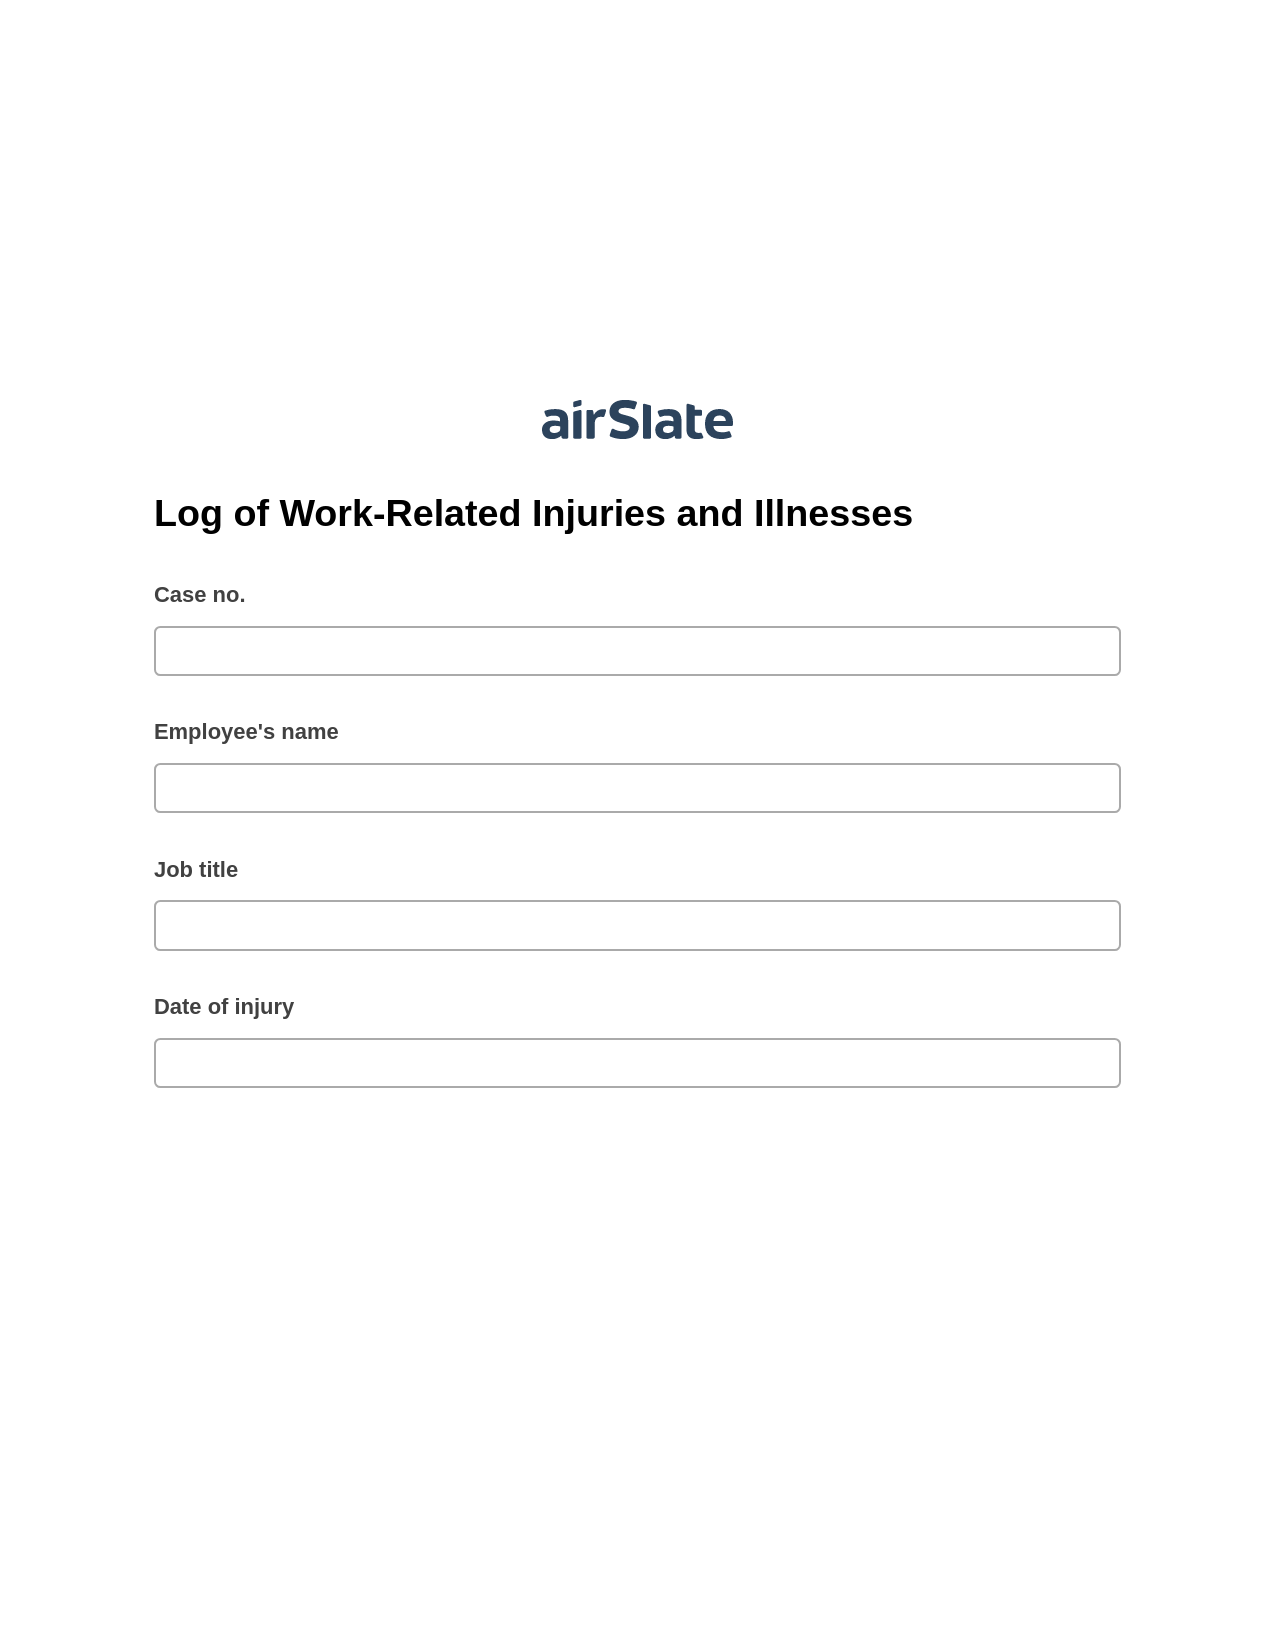 Multirole Log of Work-Related Injuries and Illnesses Pre-fill Document Bot, Email Notification Bot, Export to Salesforce Bot